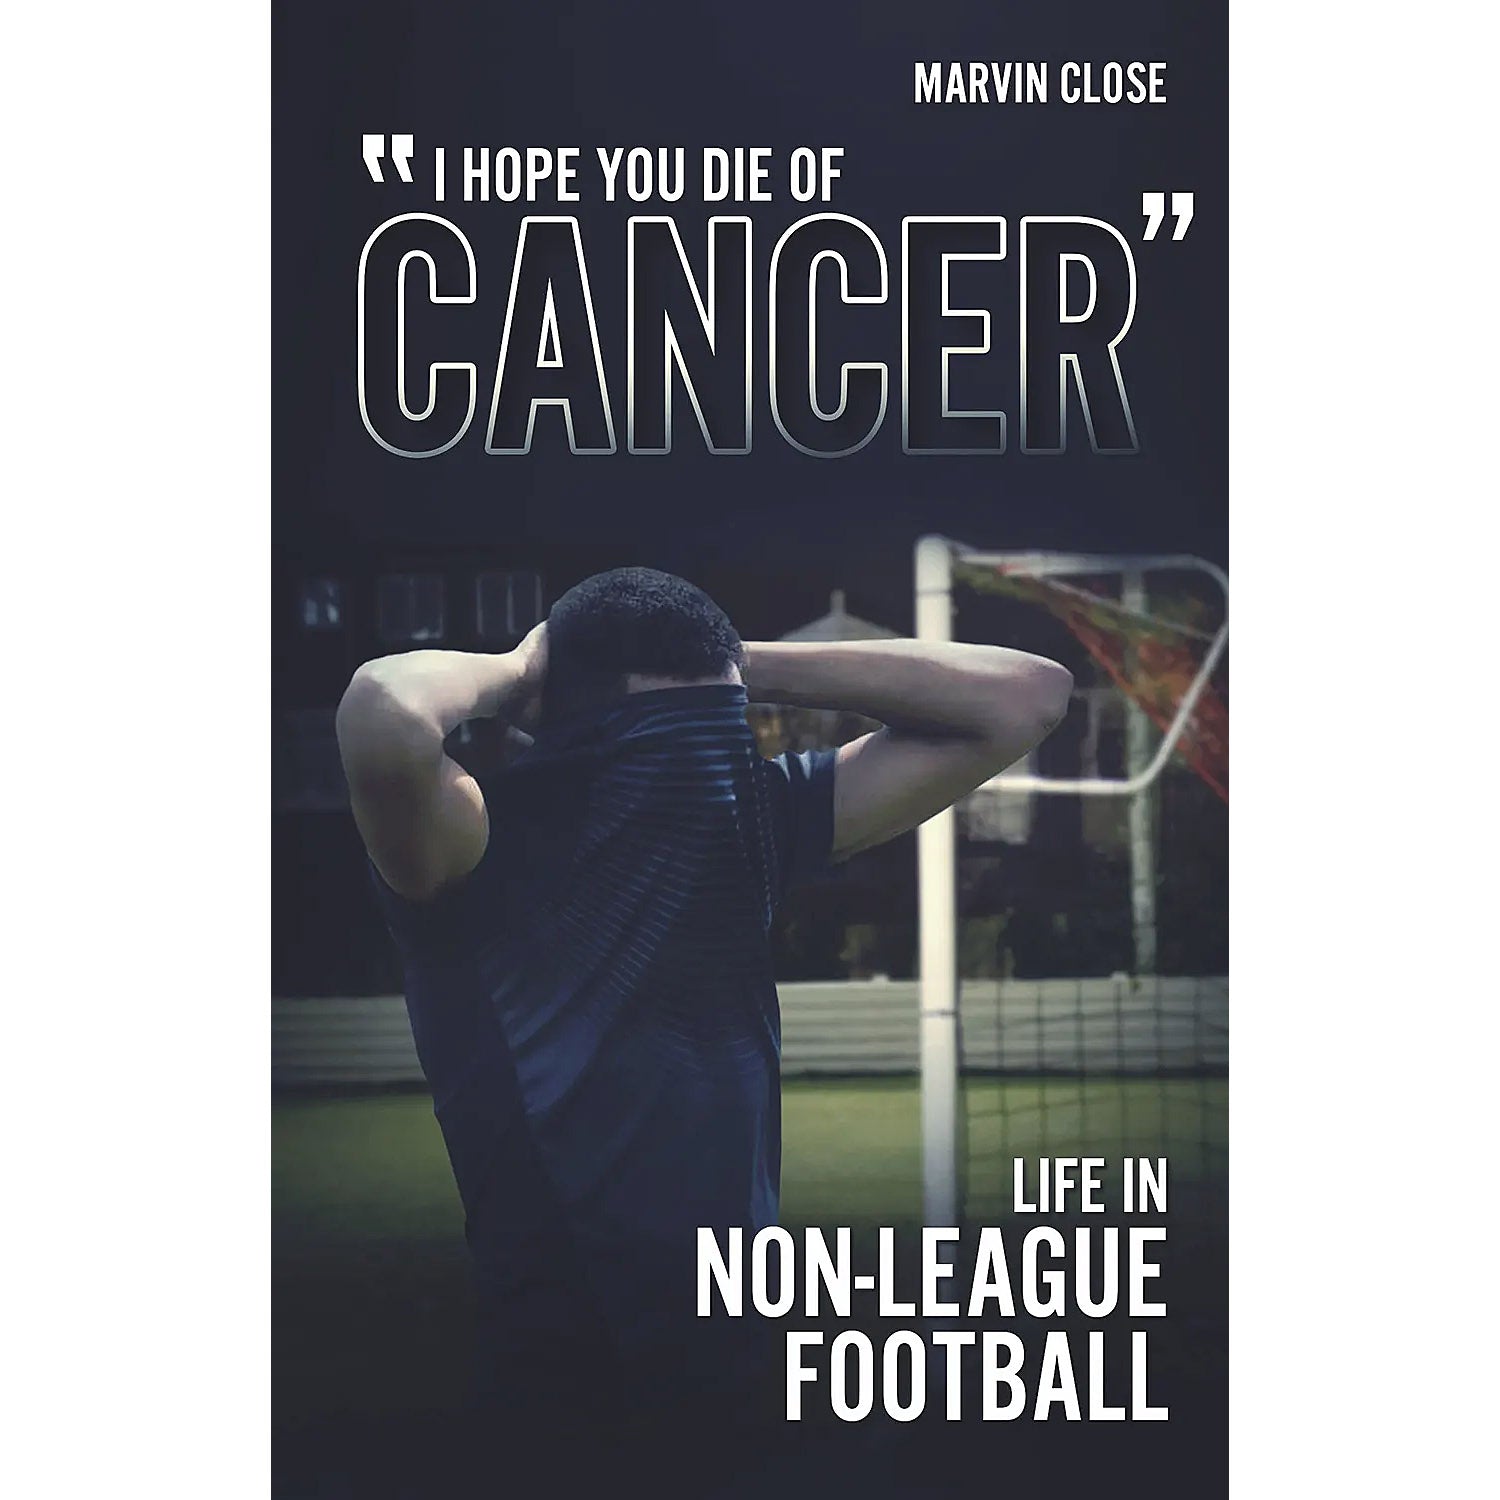 "I Hope You Die of Cancer" – Life in Non-League Football